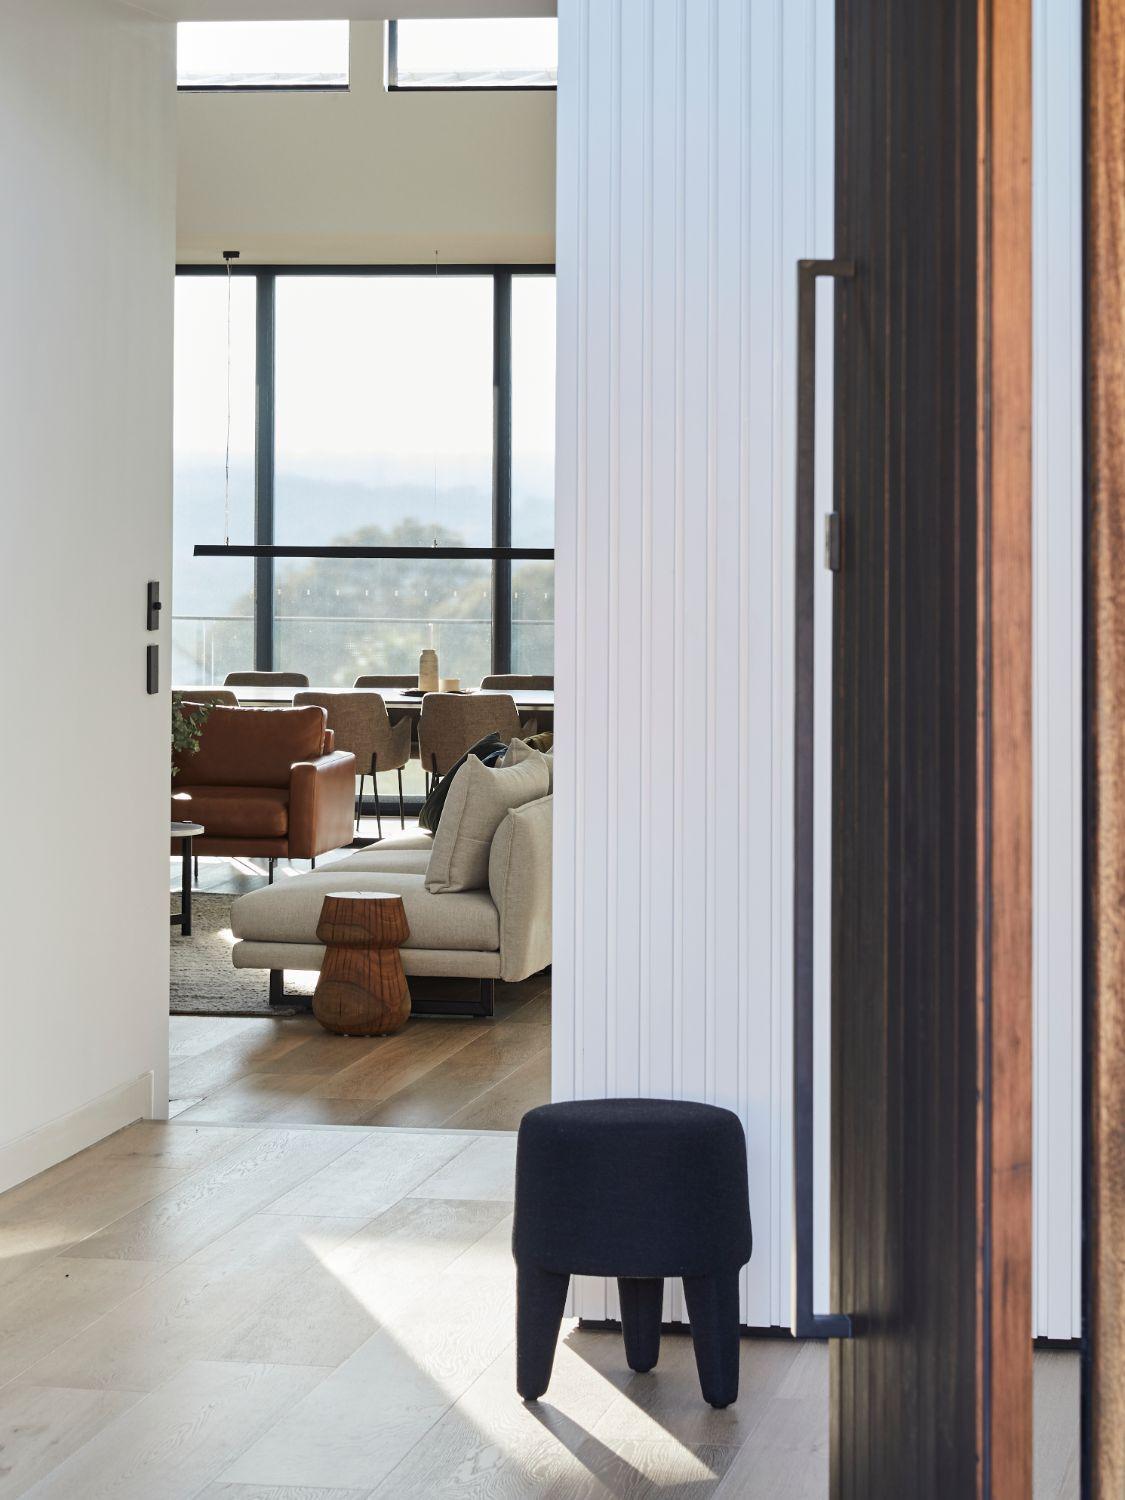 Warm Timber Pivot Entry Door Contrasts Against Light Material Selection